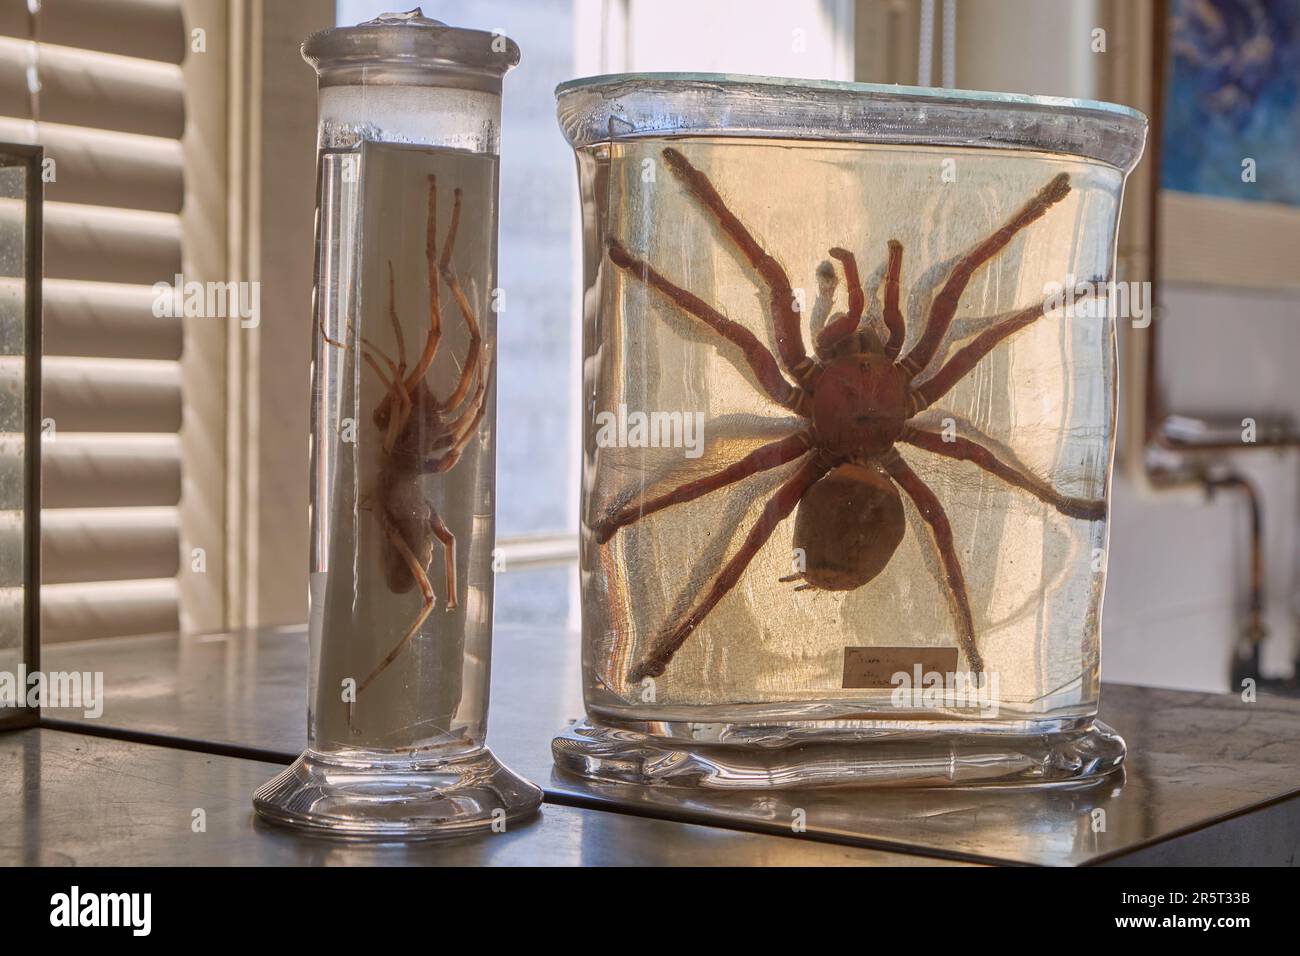 France, Paris, National Museum of Natural History, Laboratory of Arachnology, Theraphosa blondi (Goliath birdeater or goliath tarantula) and a Solifuge known as camel spider, wind scorpion or sun spider Stock Photo